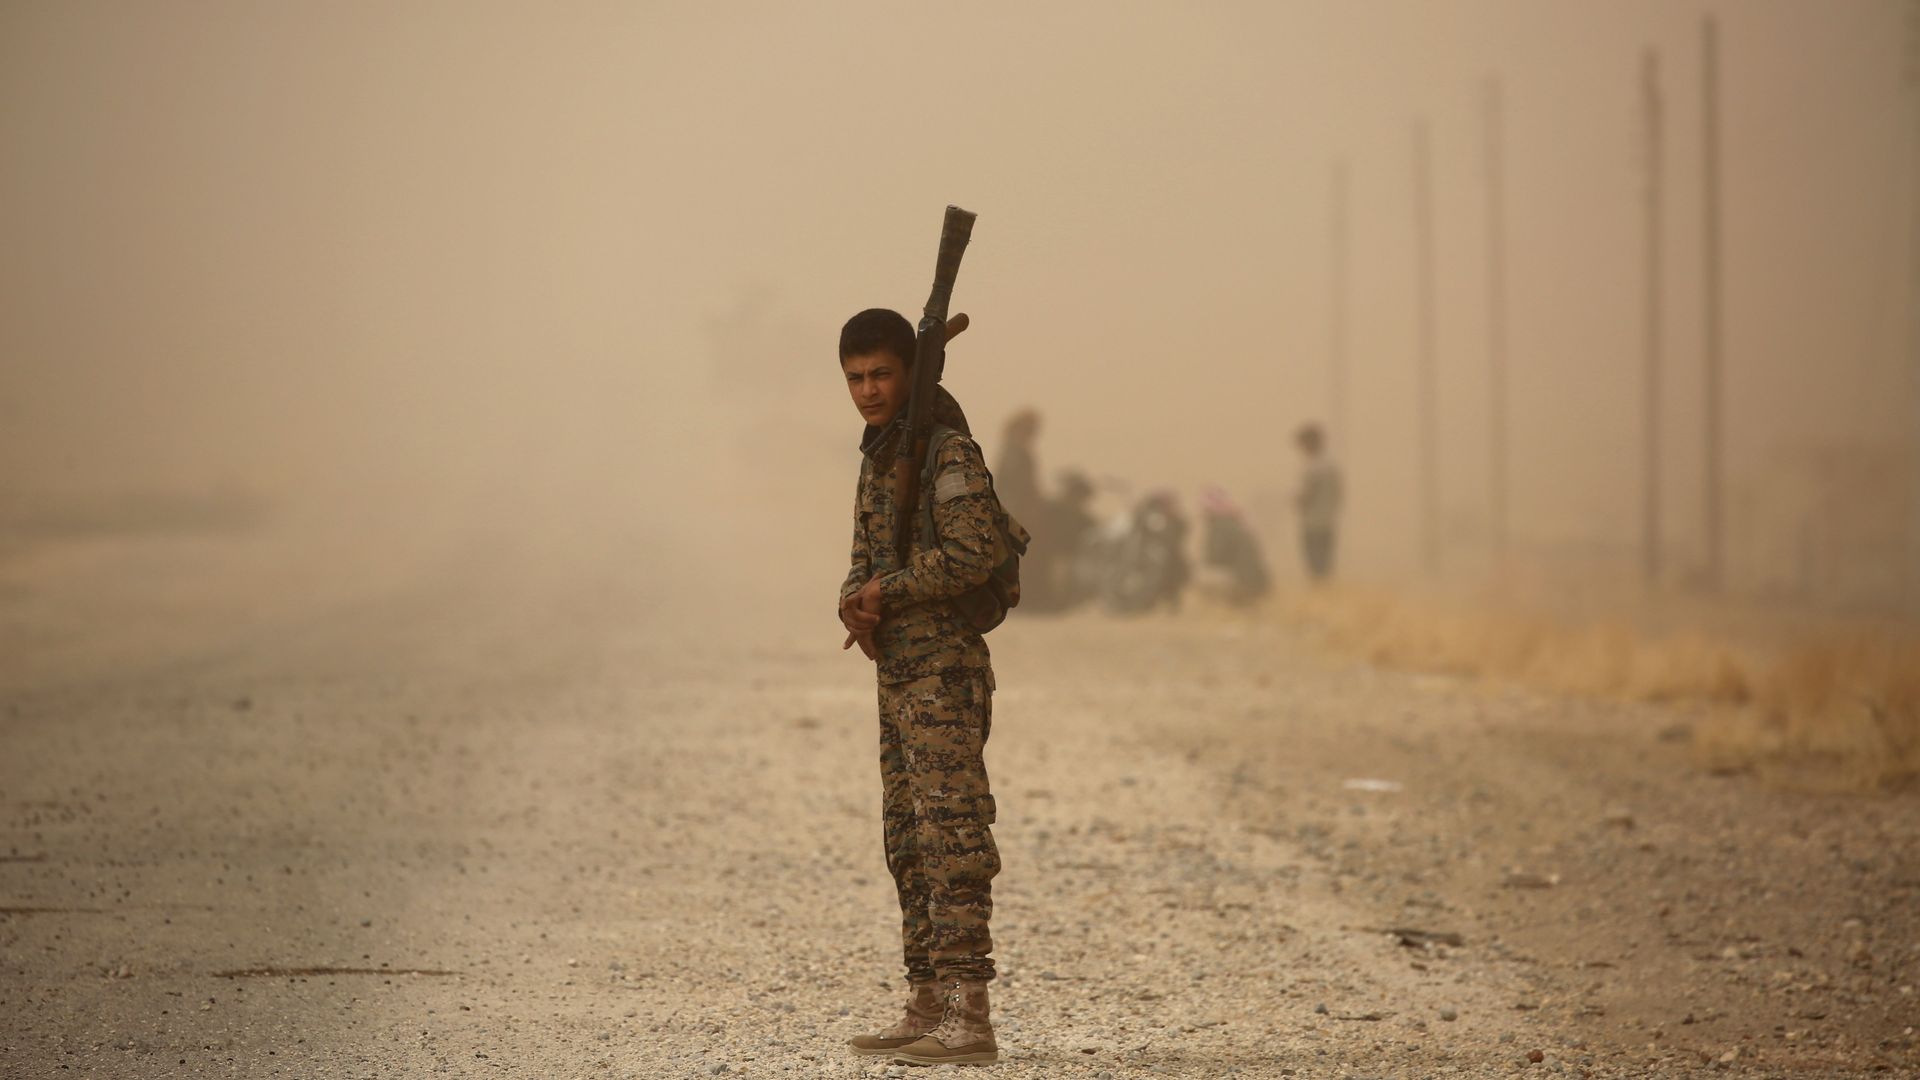 A member of the Syrian Democratic Forces stands with a weapon in a sandstorm.